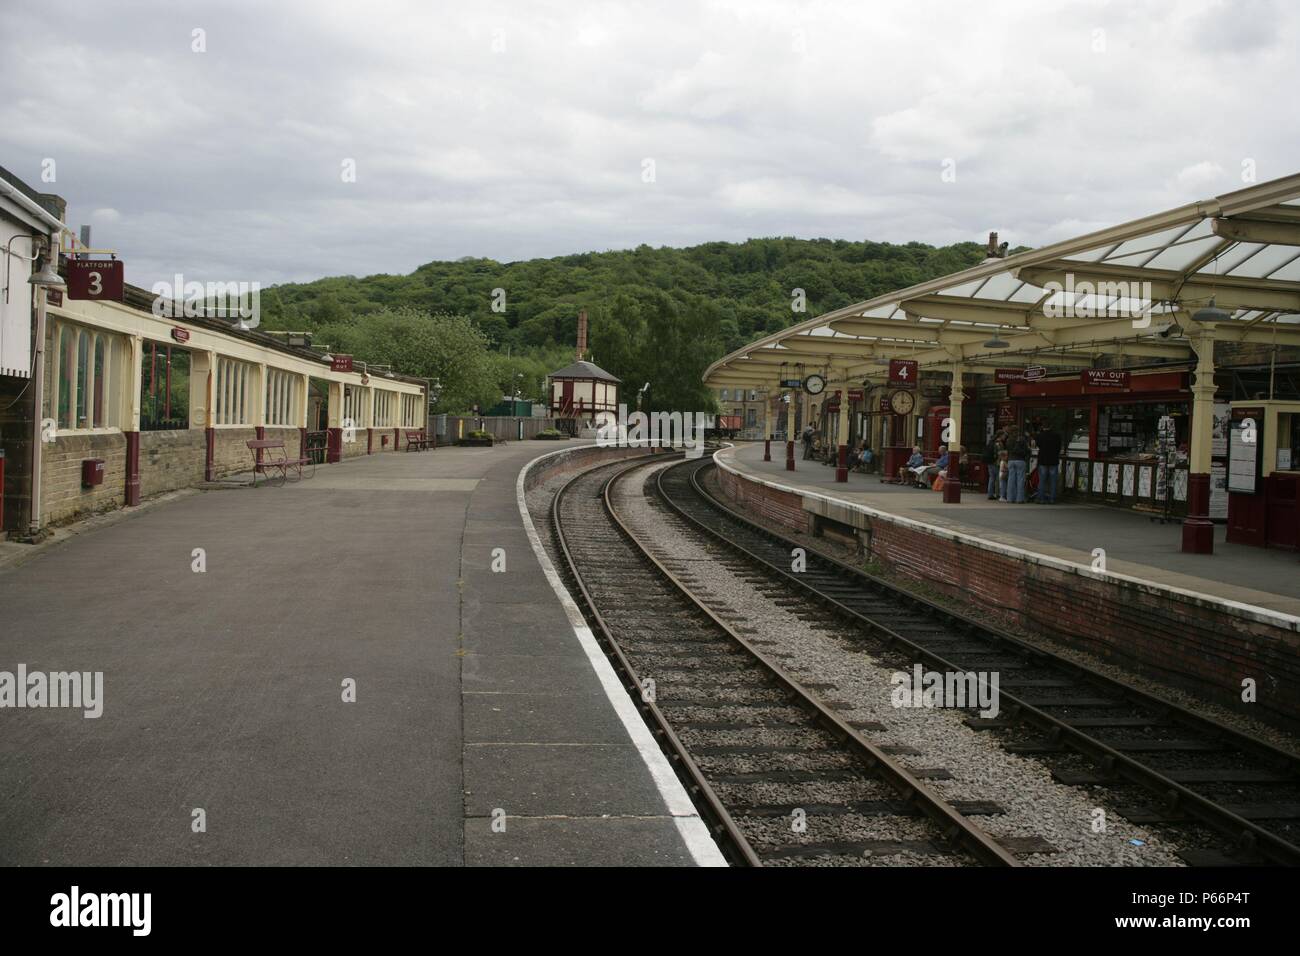 General view of the Keighley and Worth Valley Railway platforms at Keighley station, Yorkshire. 2007 Stock Photo